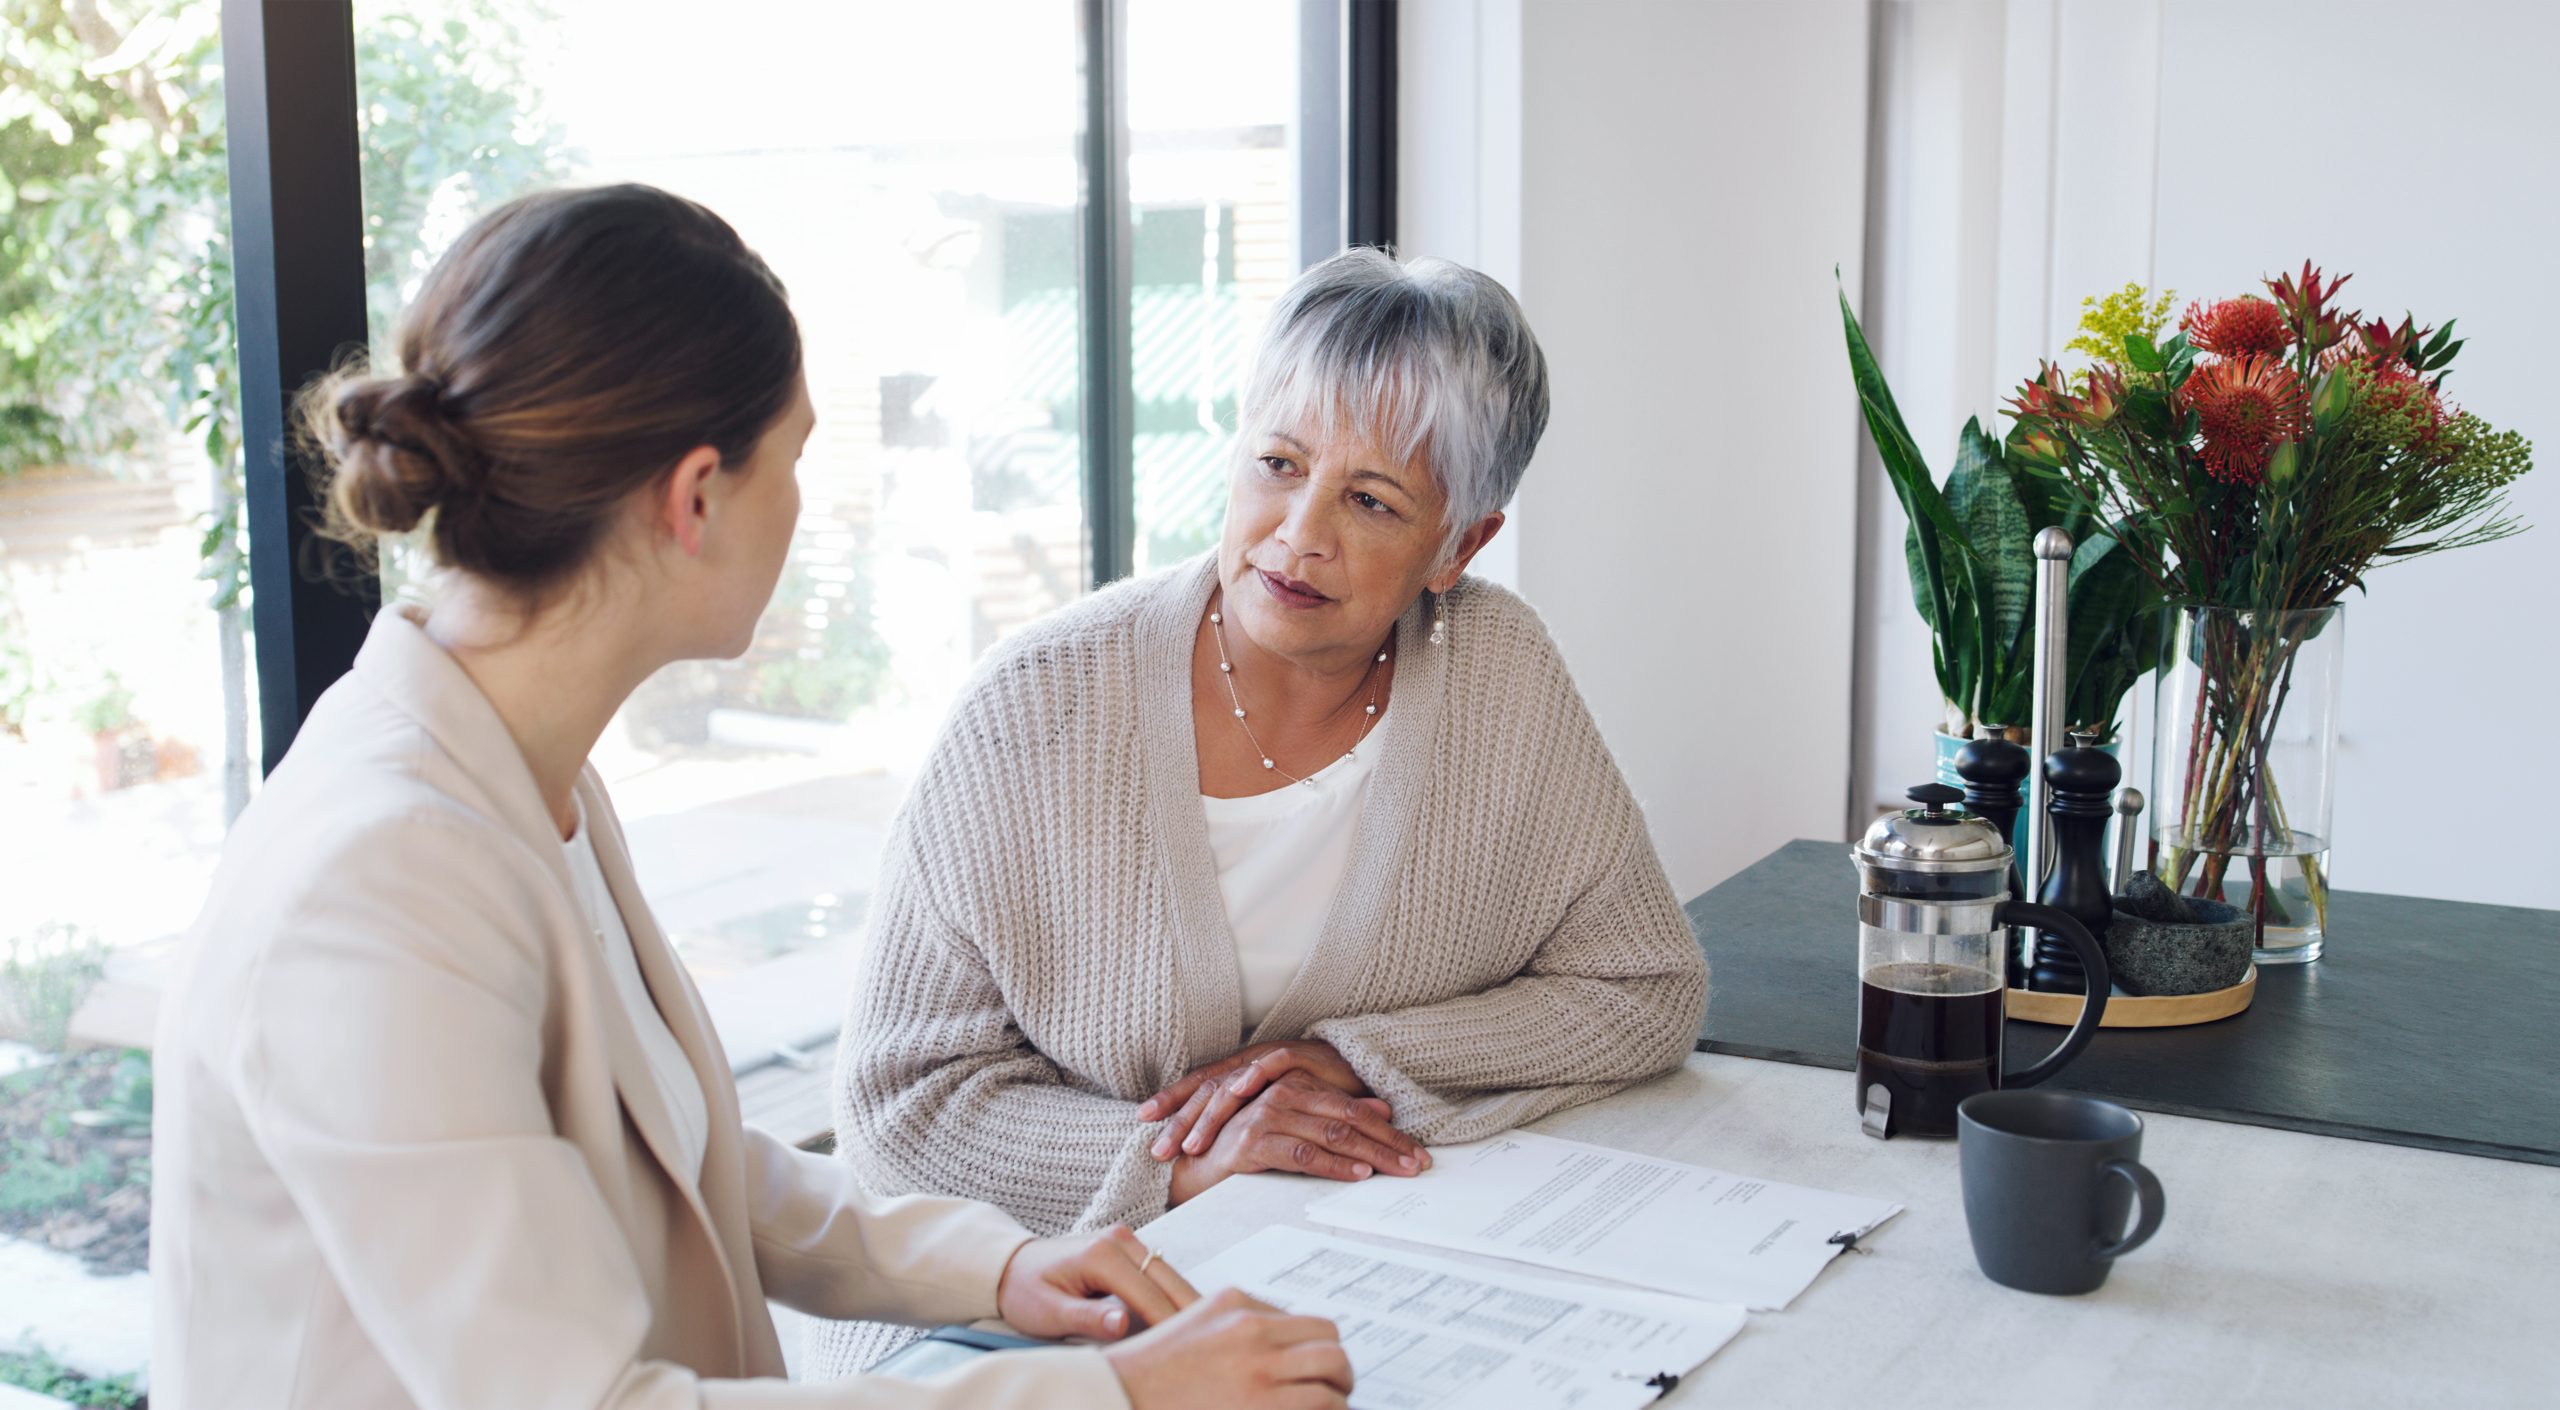 Shot of a senior woman meeting with a consultant to discuss paperwork at home